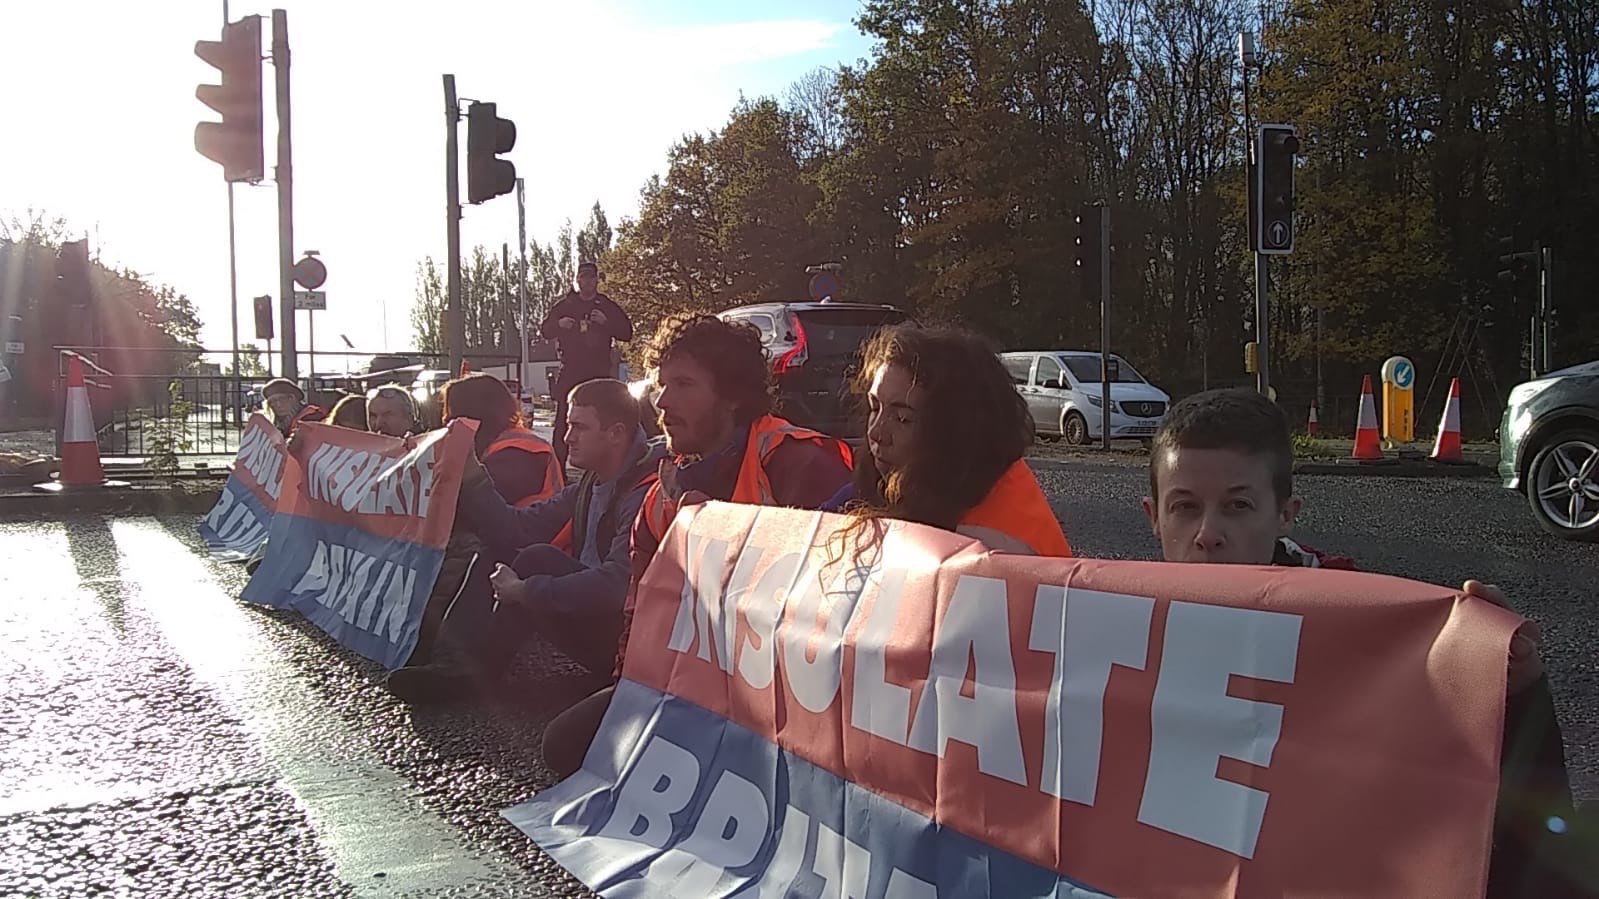 NEWS | Insulate Britain protesters block roads in three cities in England